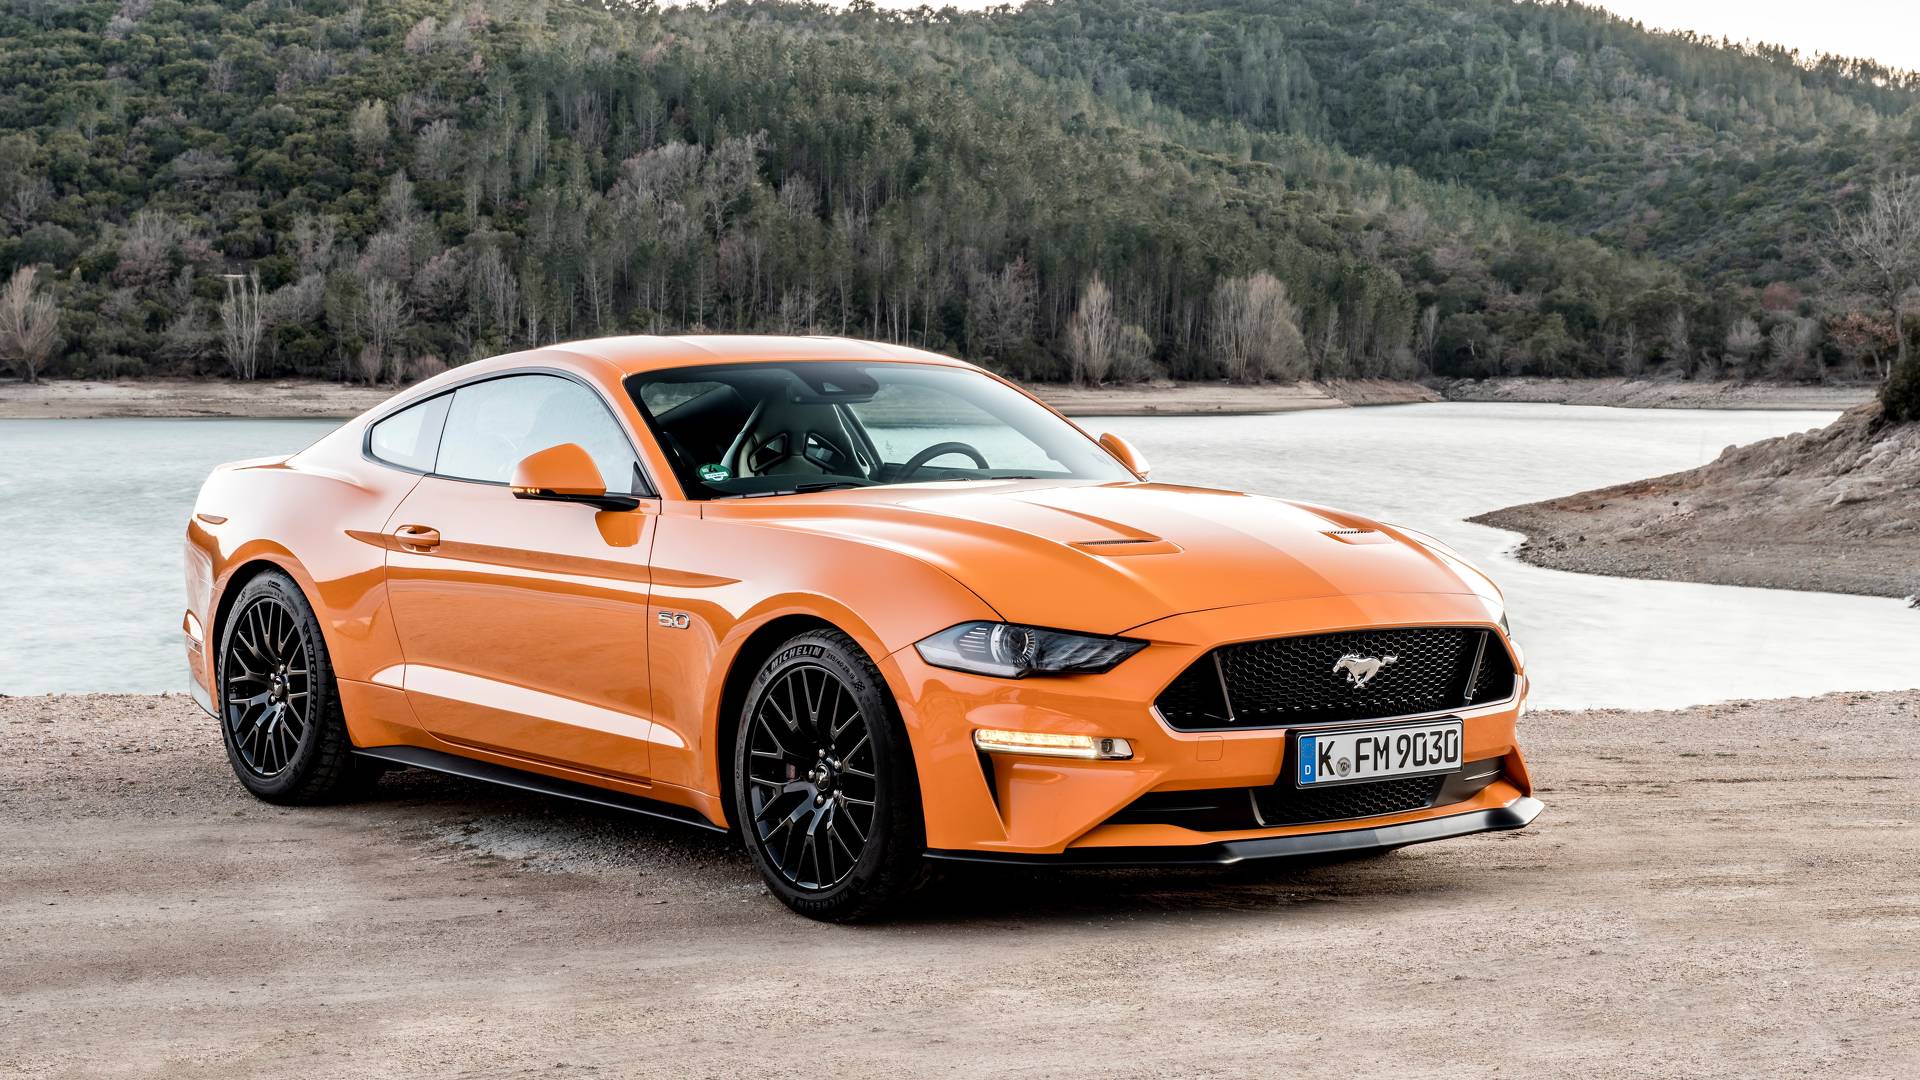 Combien coûte une Ford Mustang d'occasion ? 2018 ford mustang